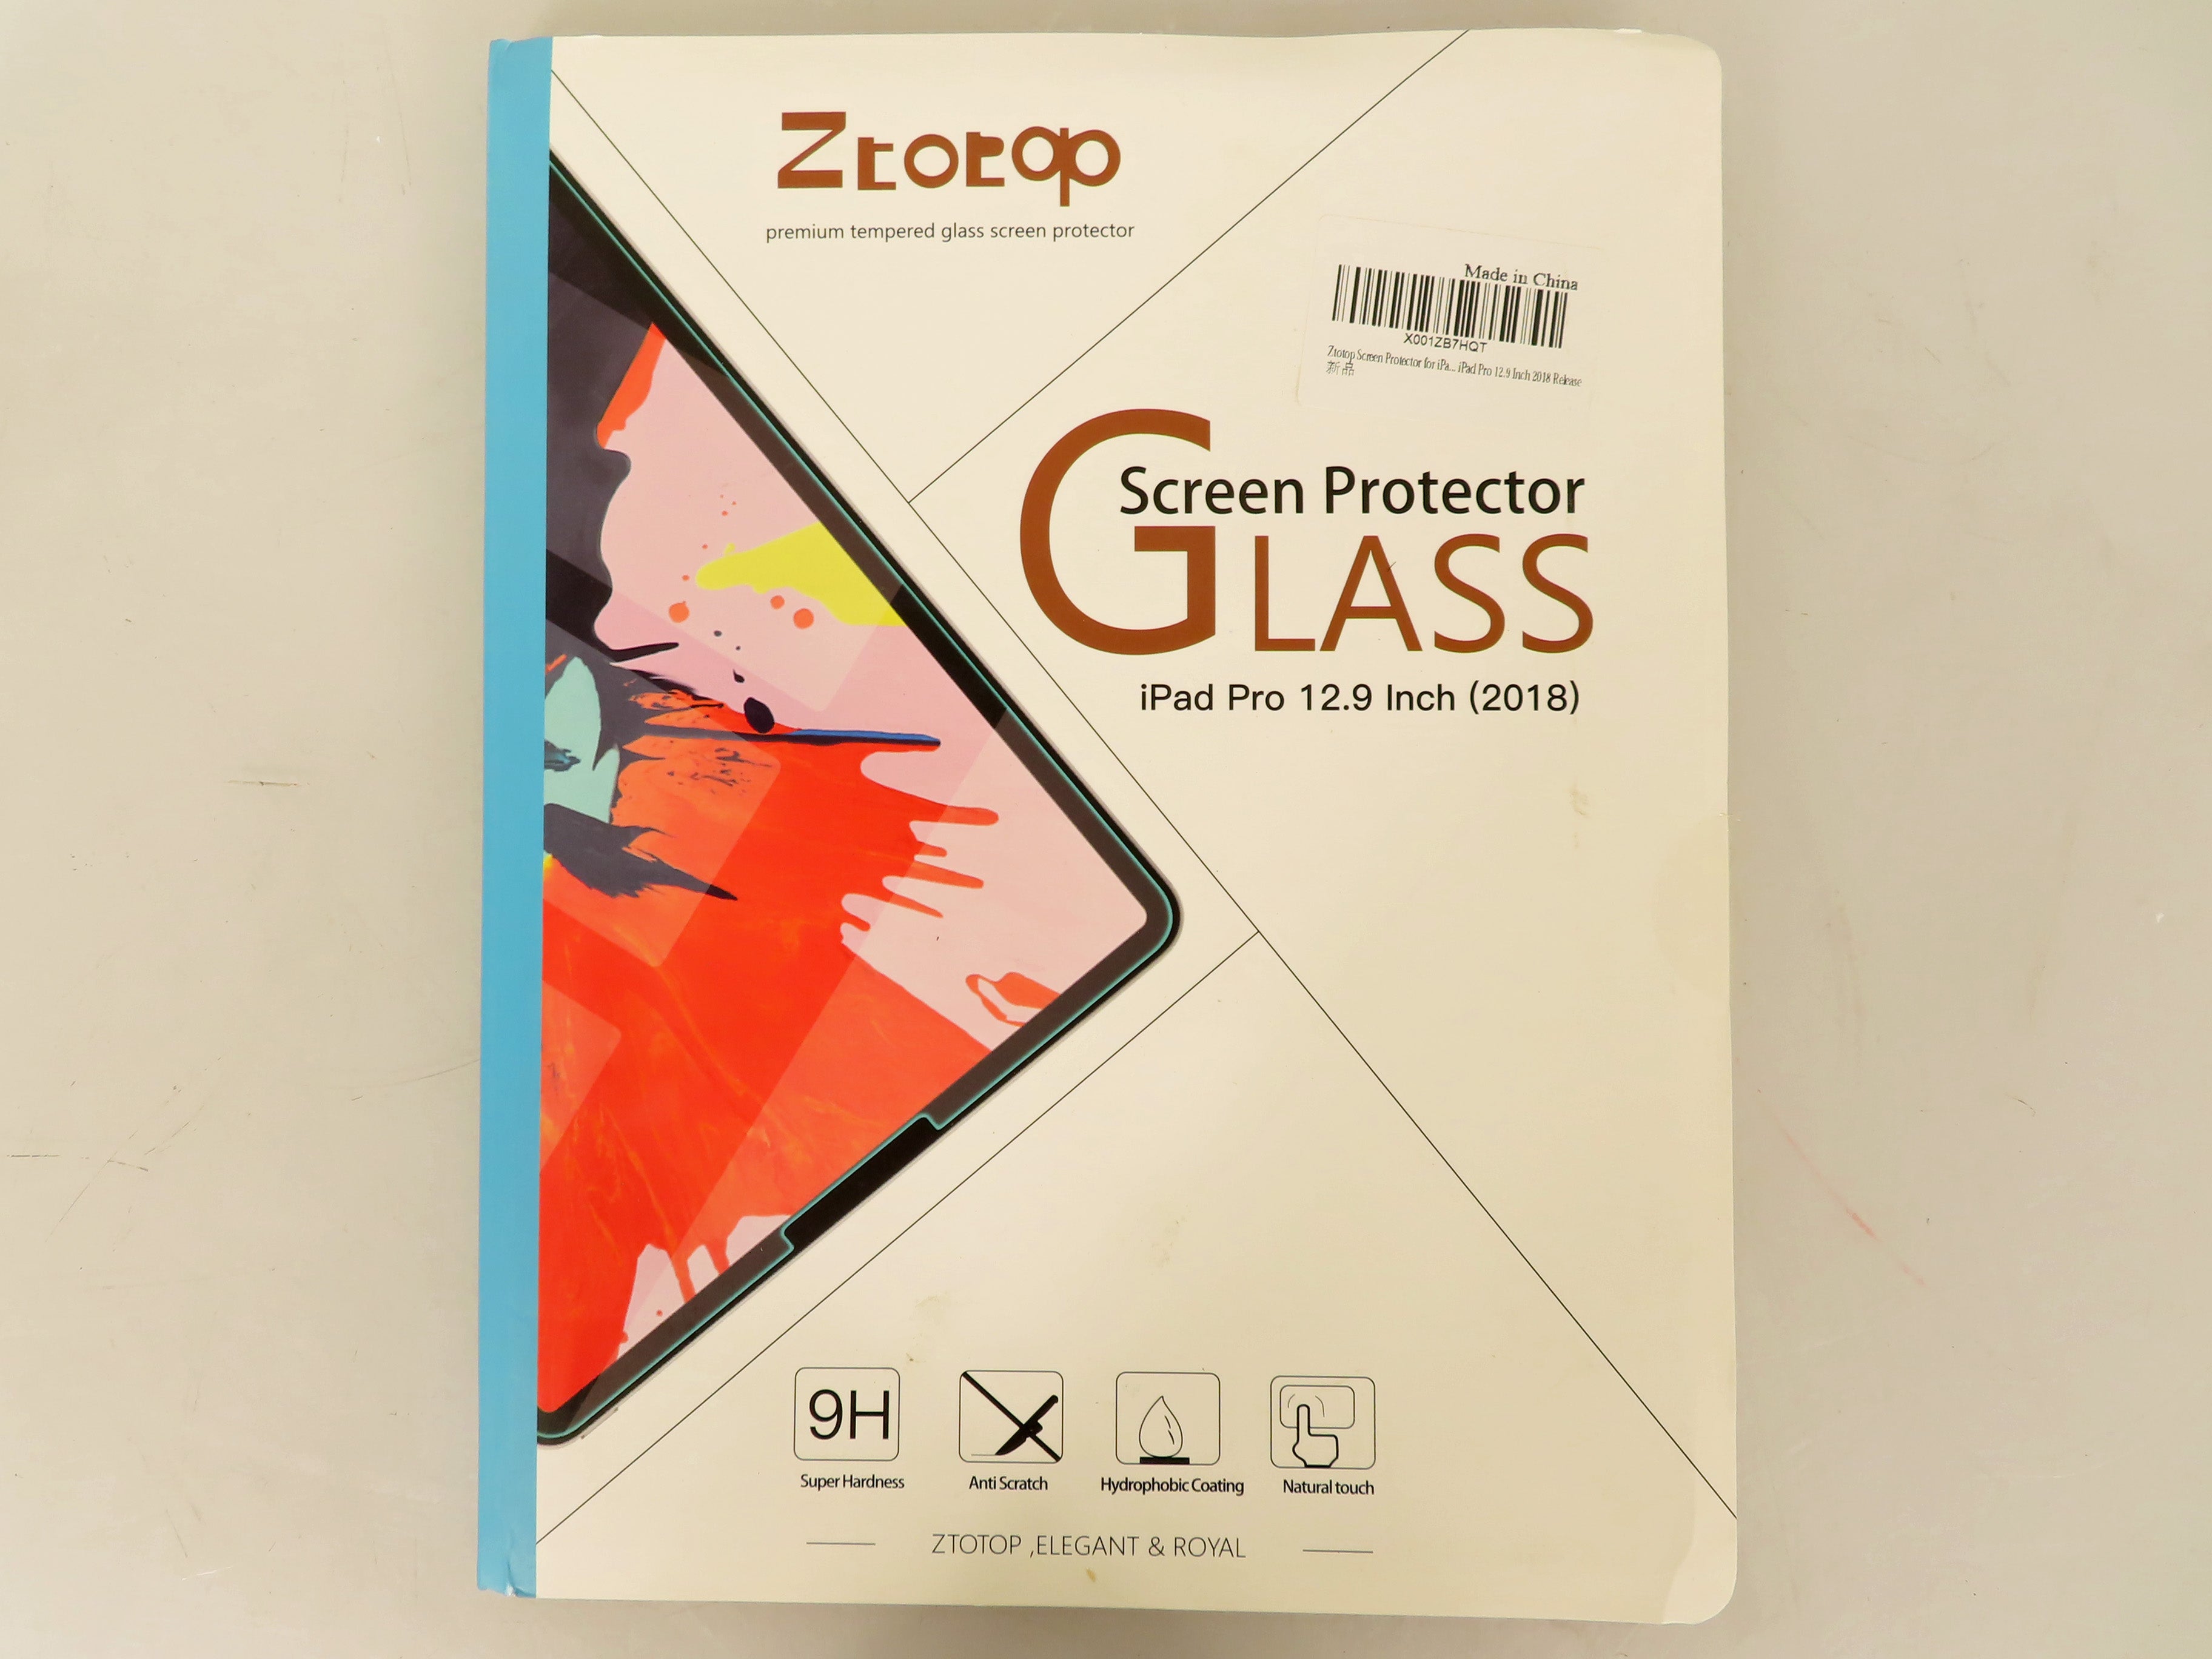 Ztotop Glass Screen Protector For iPad 12.9 In. (2018)